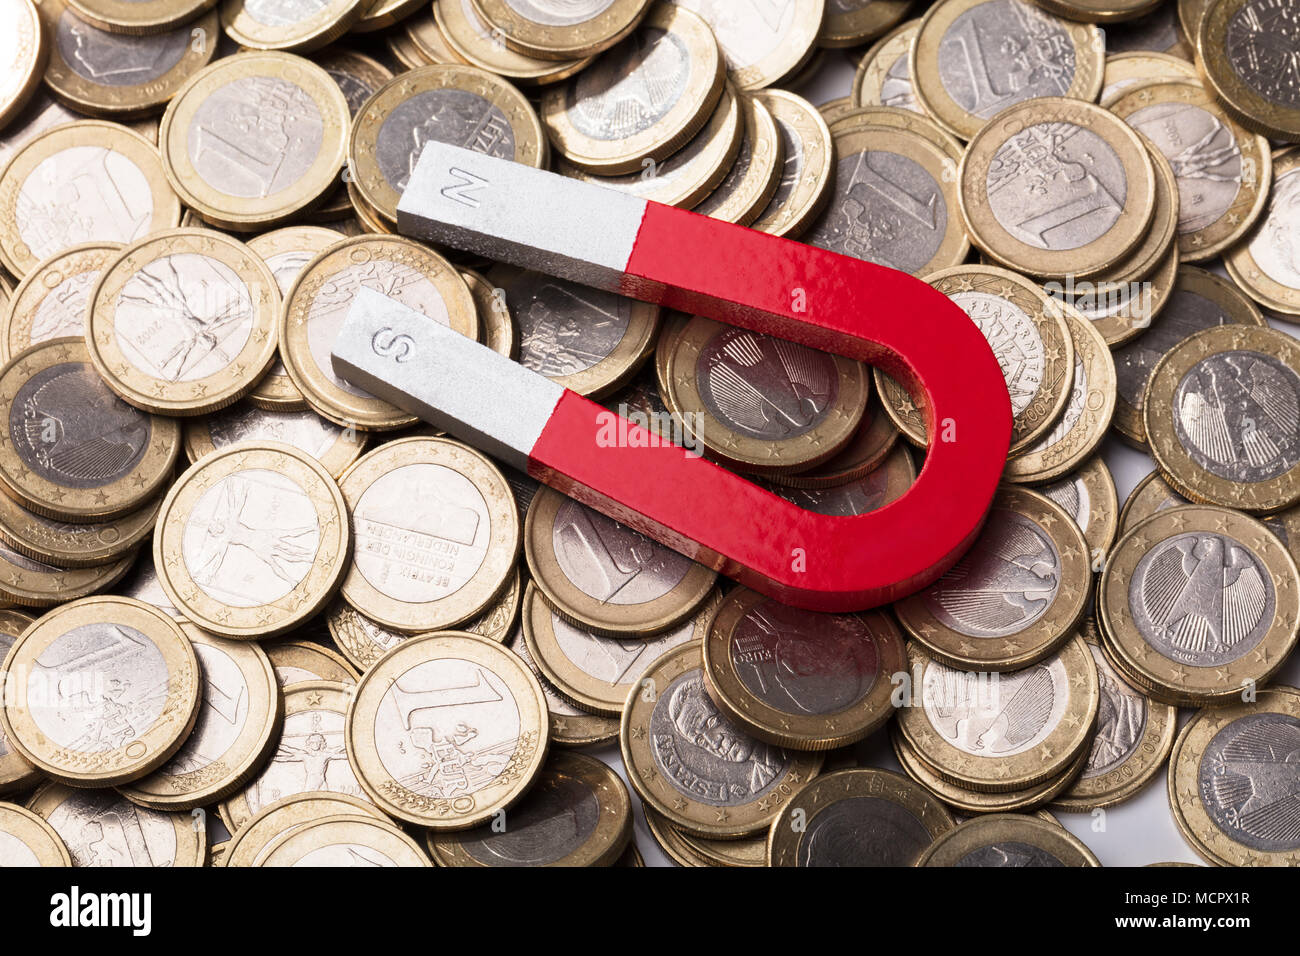 Elevated View Of A Red Horseshoe Magnet On Euro Coins Stock Photo